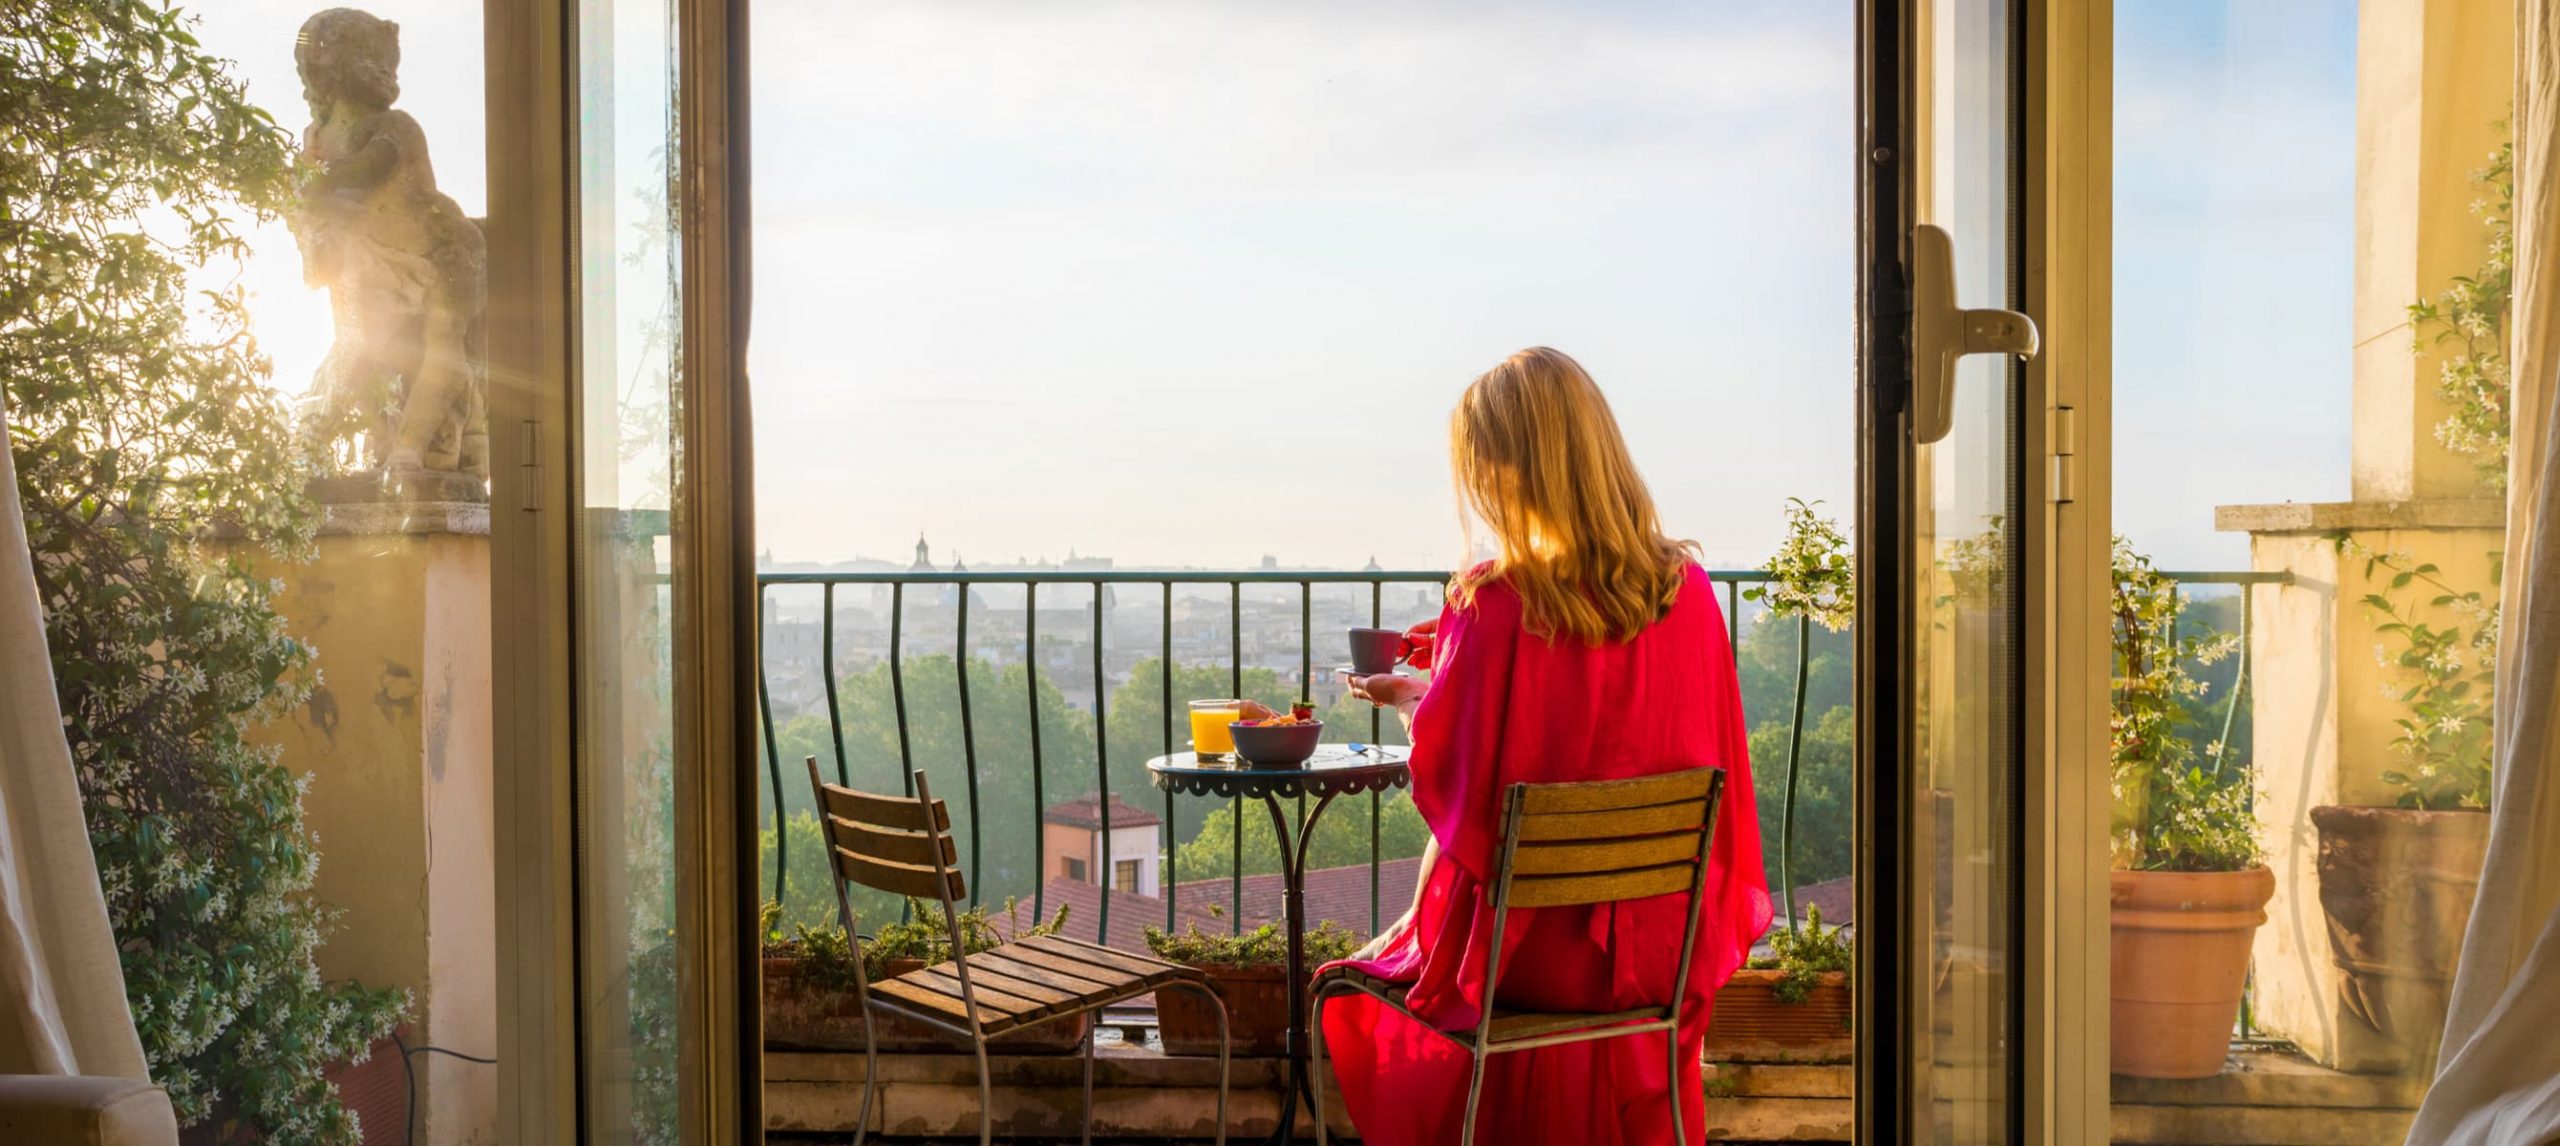 Woman sitting on balcony and overlooking Rome in morning at sunrise